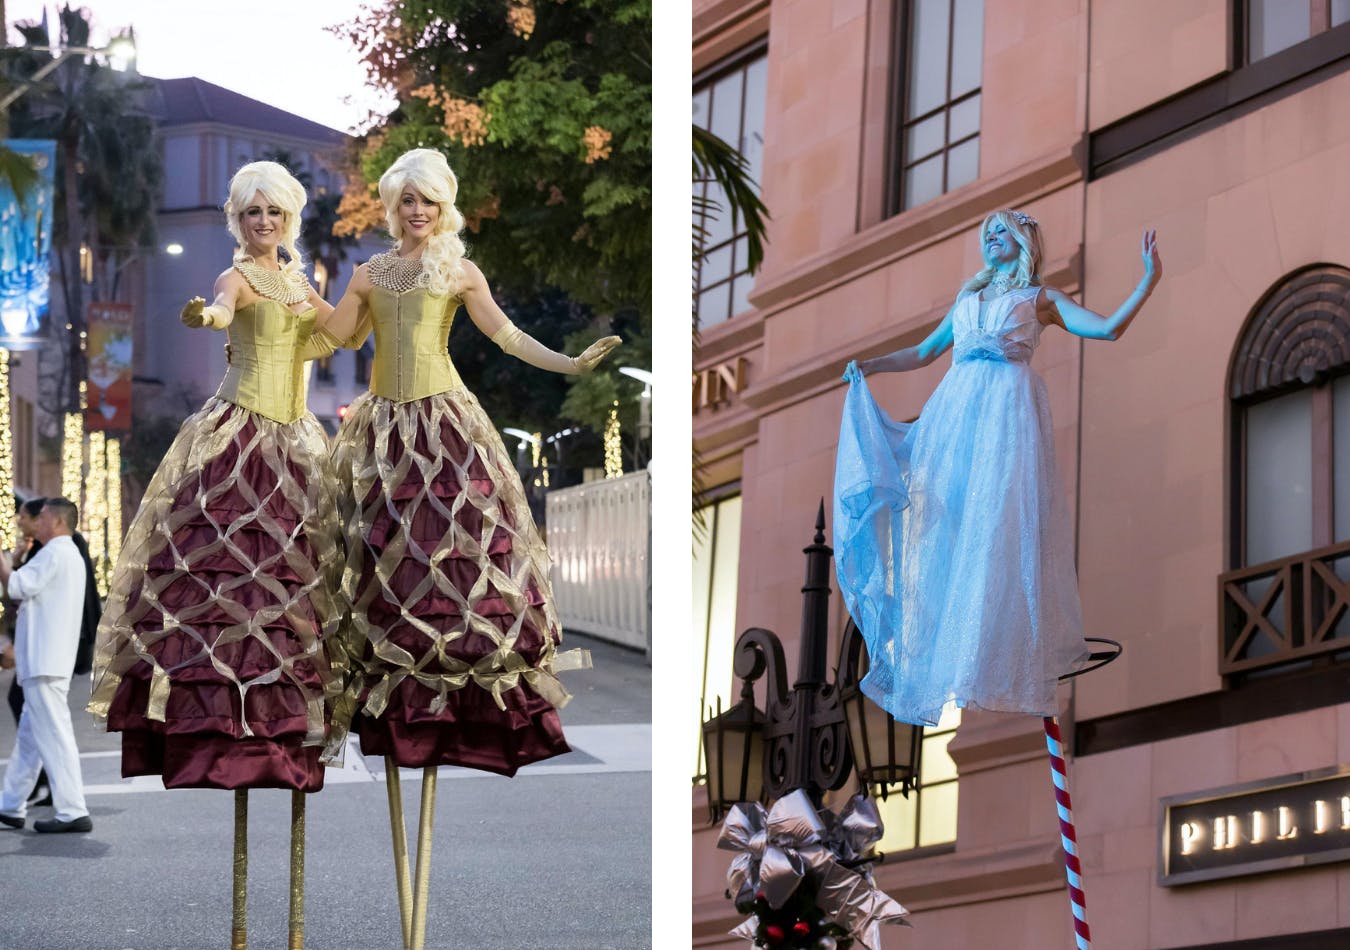 Stilt walkers greet guests on rodeo drive for corporate holiday event | PartySlate